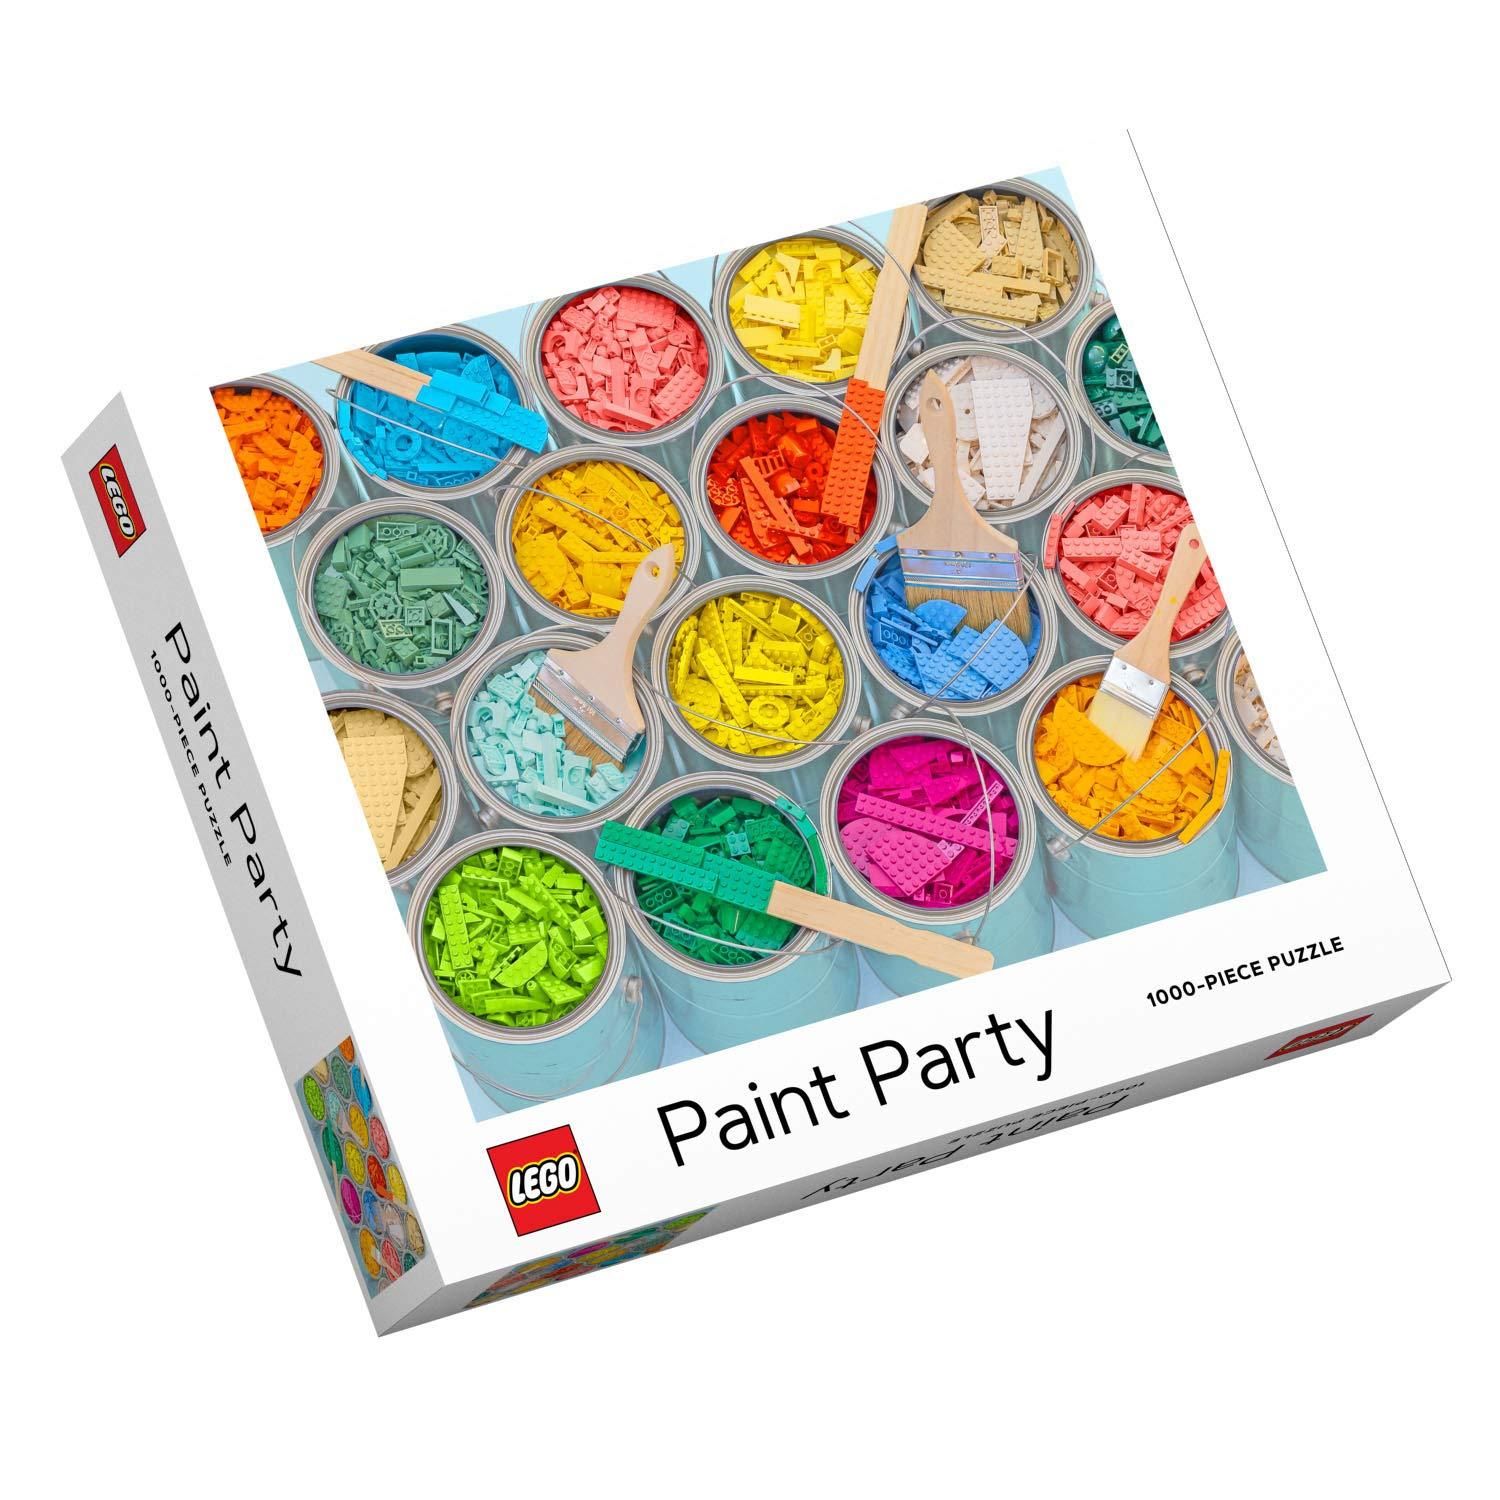 1000-Piece LEGO Paint Party Jigsaw Puzzle for $7.40